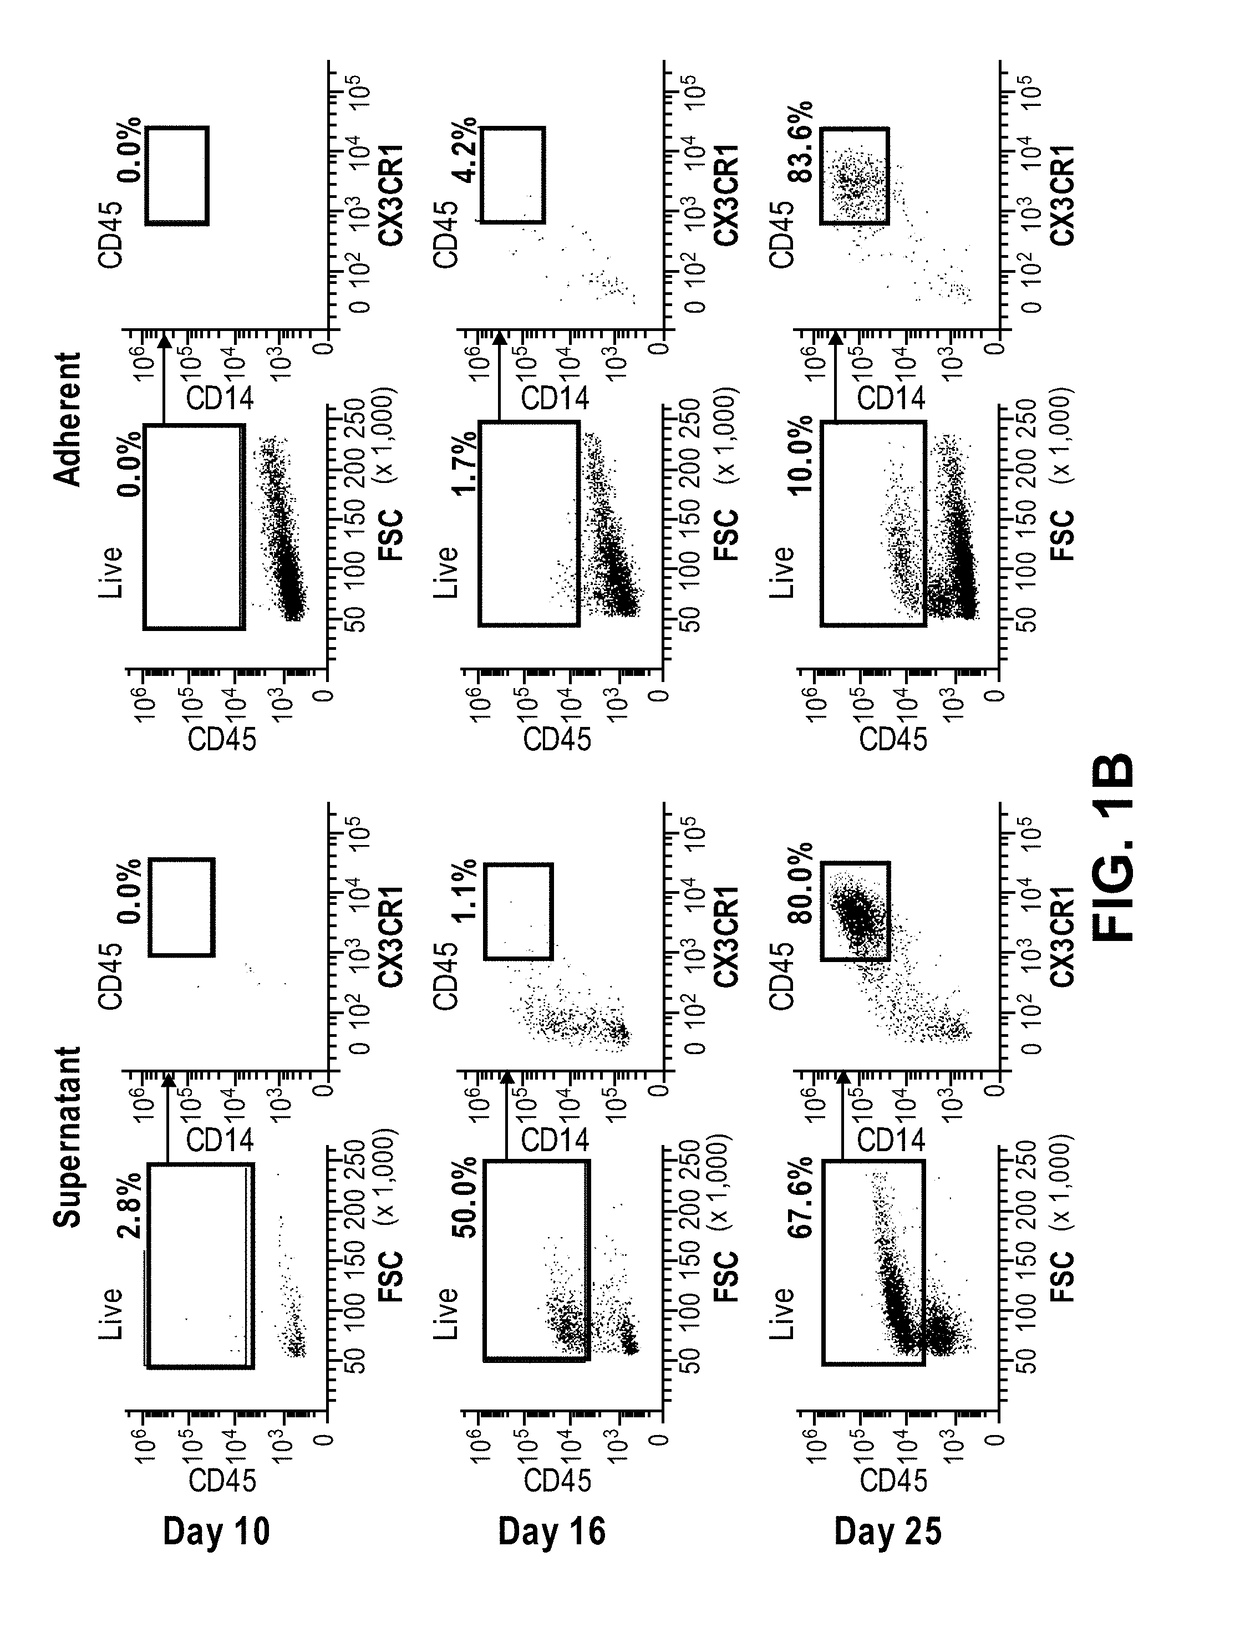 Microglia derived from pluripotent stem cells and methods of making and using the same